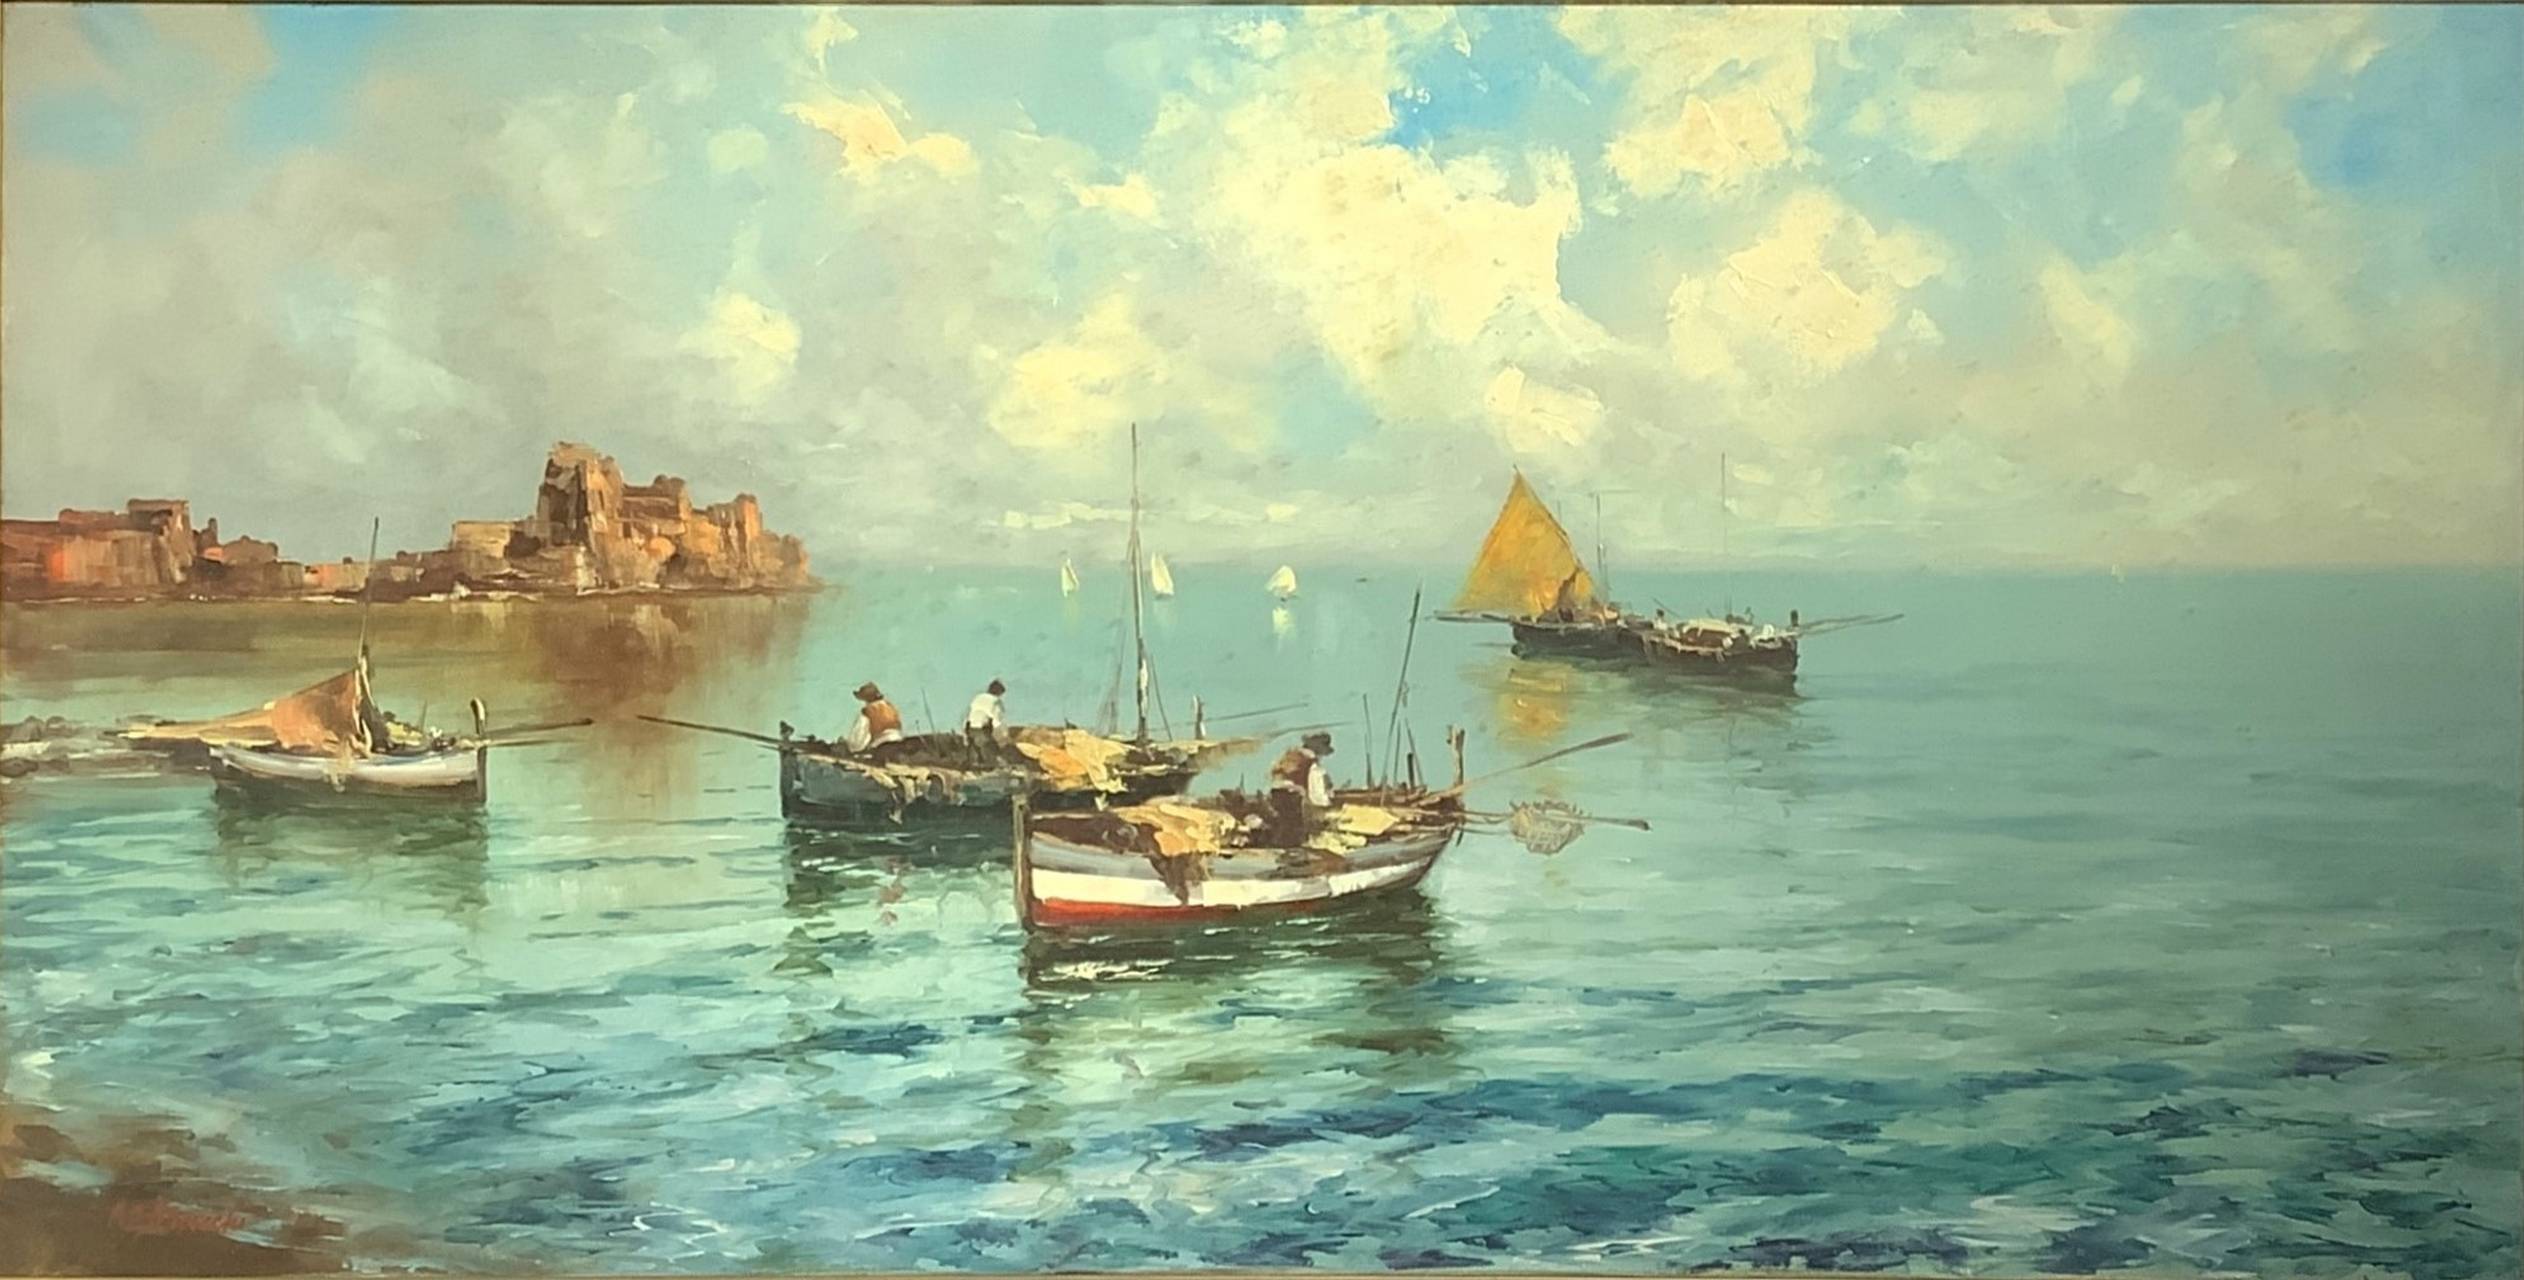 Oil painting on canvas depicting Castel dell 'Ovo. Signed on the lower left A. C. Bracchi, painter a